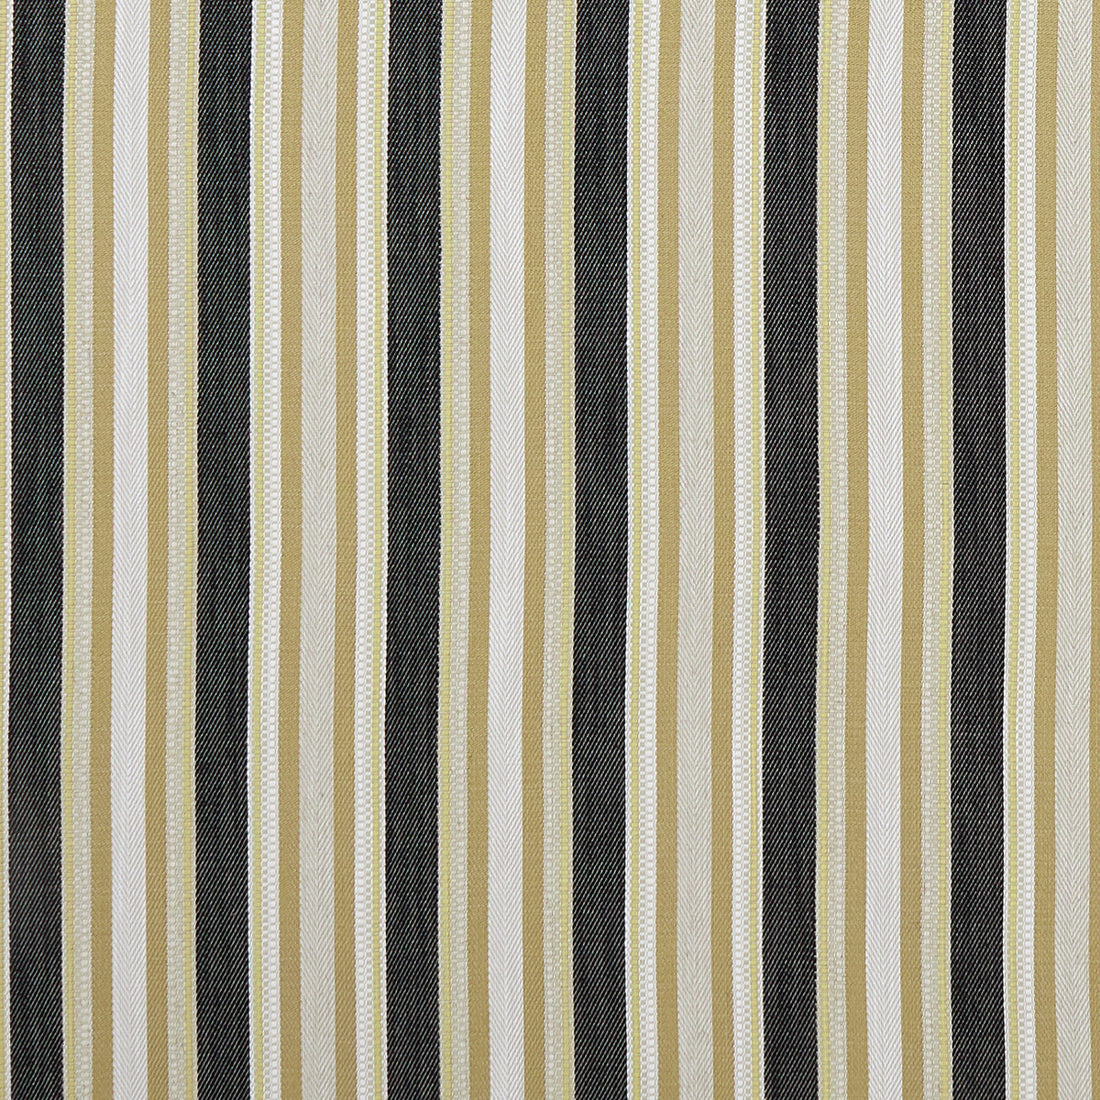 Ziba fabric in charcoal/ochre color - pattern F1352/02.CAC.0 - by Clarke And Clarke in the Clarke &amp; Clarke Prince Of Persia collection